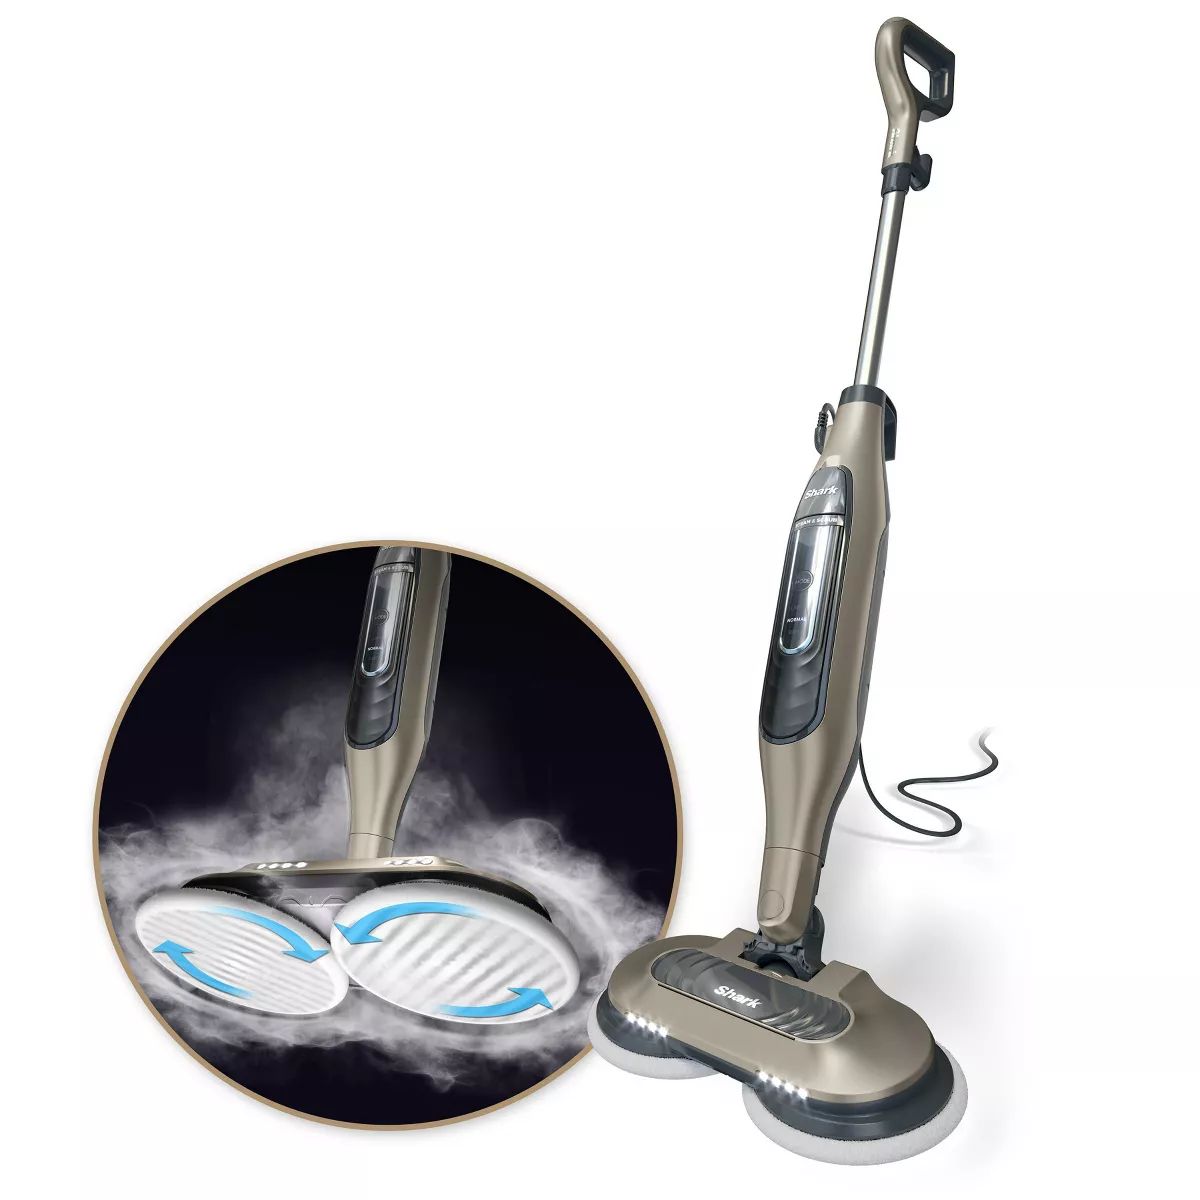 Shark Steam and Scrub All-in-One Scrubbing and Sanitizing Hard Floor Steam Mop - S7001TGT | Target